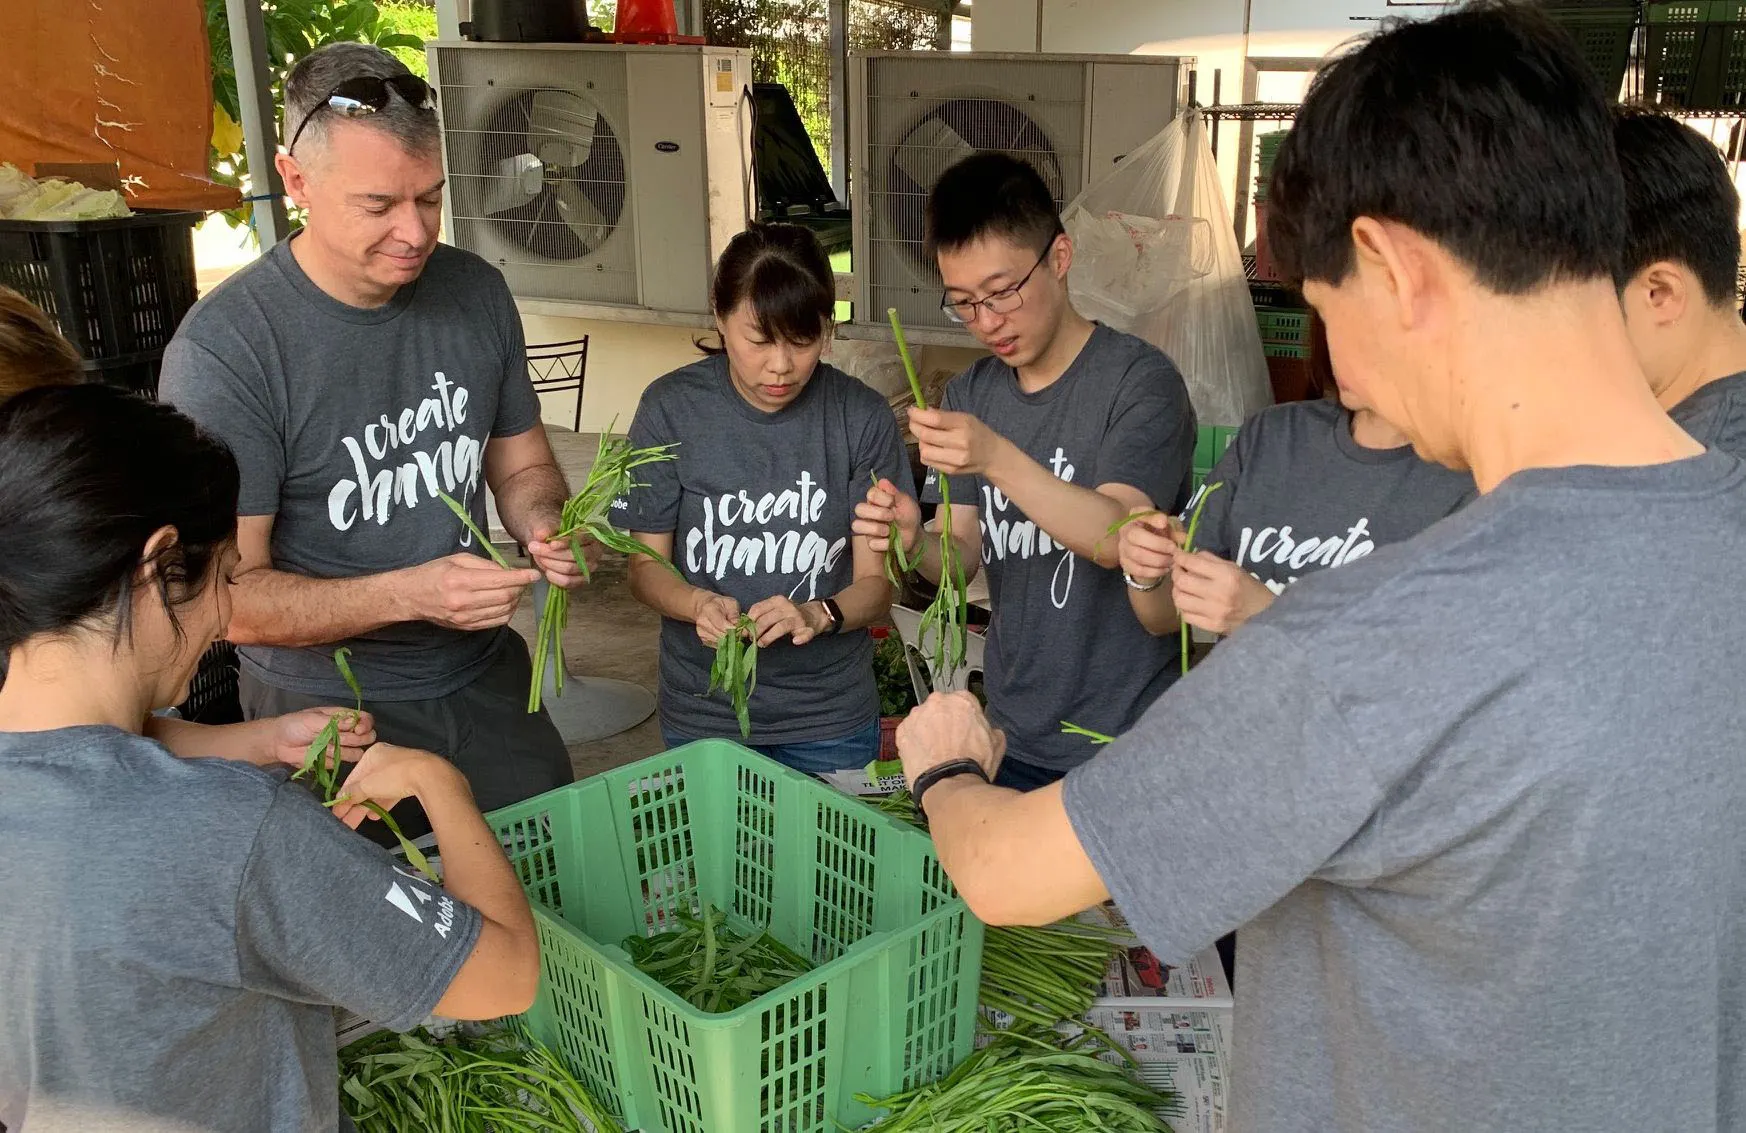 Adobe Singapore employees taking part in a Create Change volunteering opportunity. They are helping to sort vegetables.